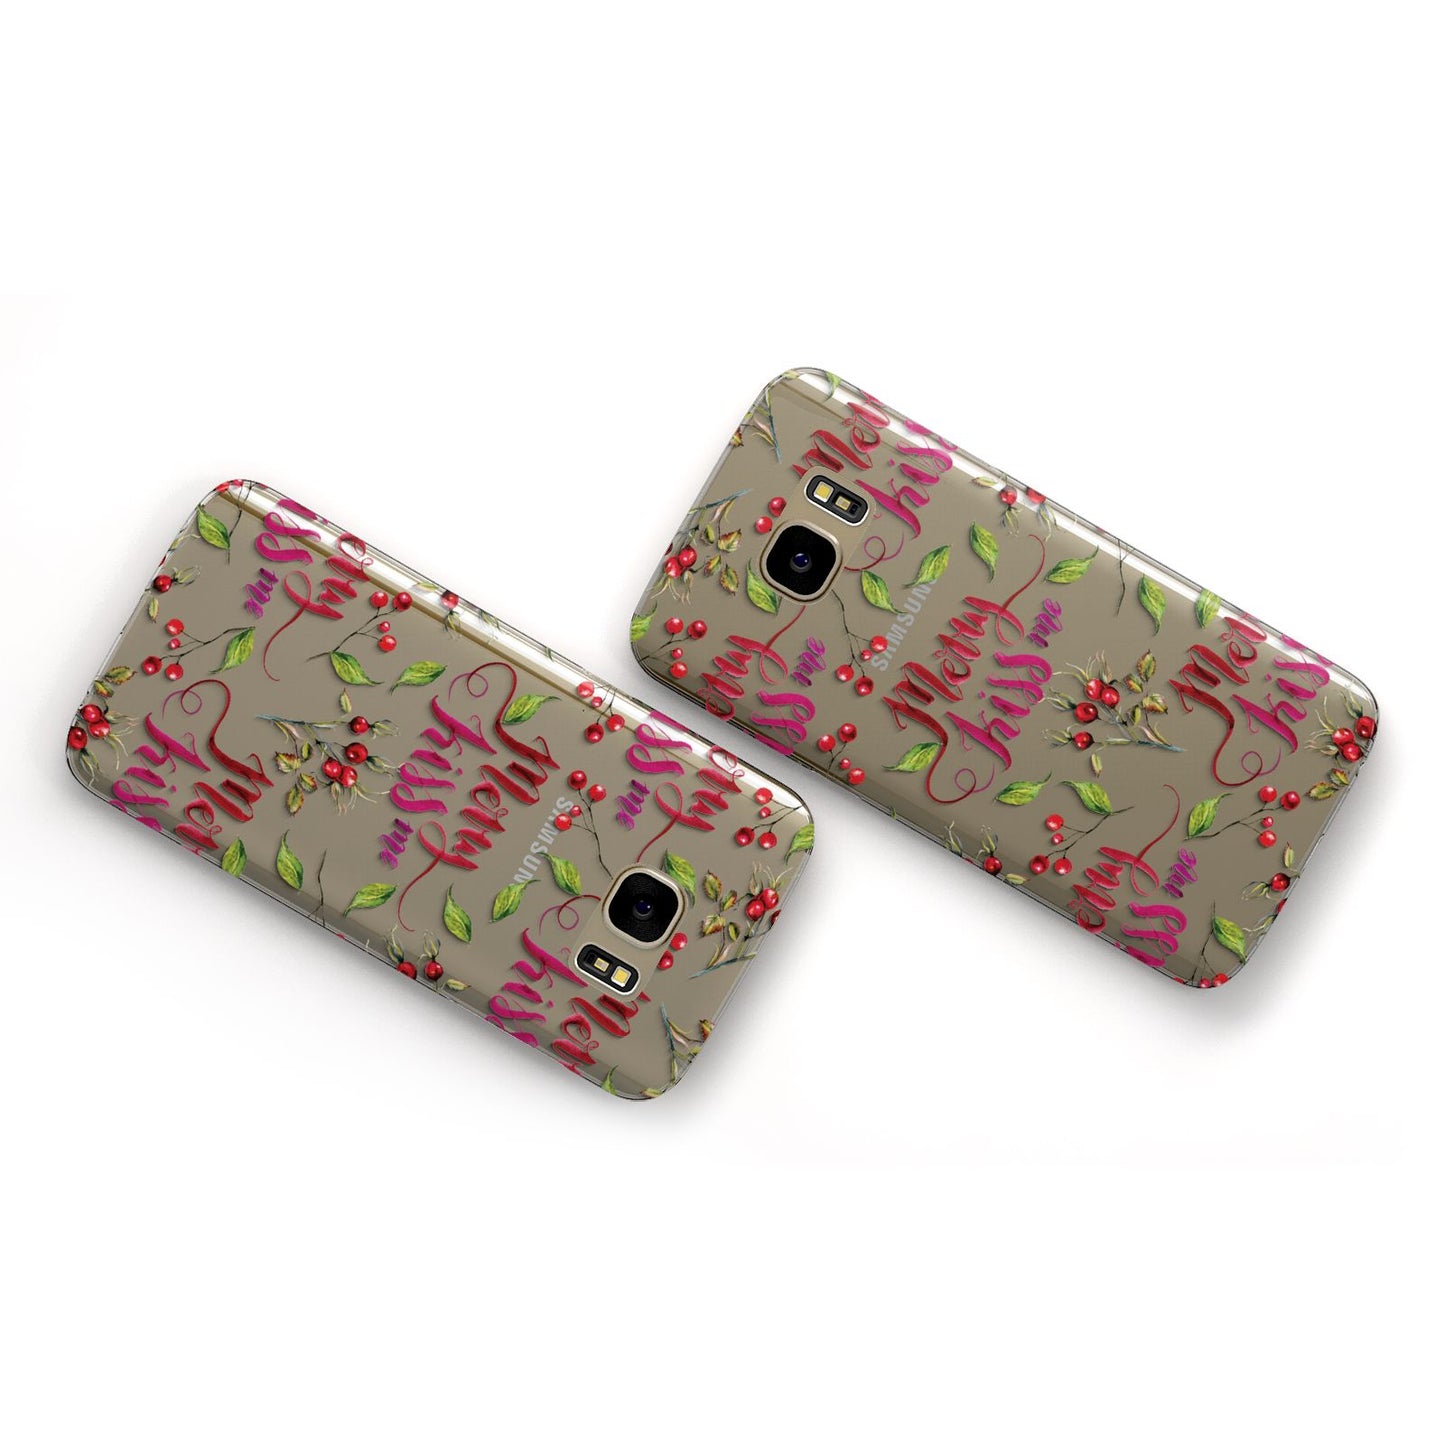 Merry kiss me Samsung Galaxy Case Flat Overview